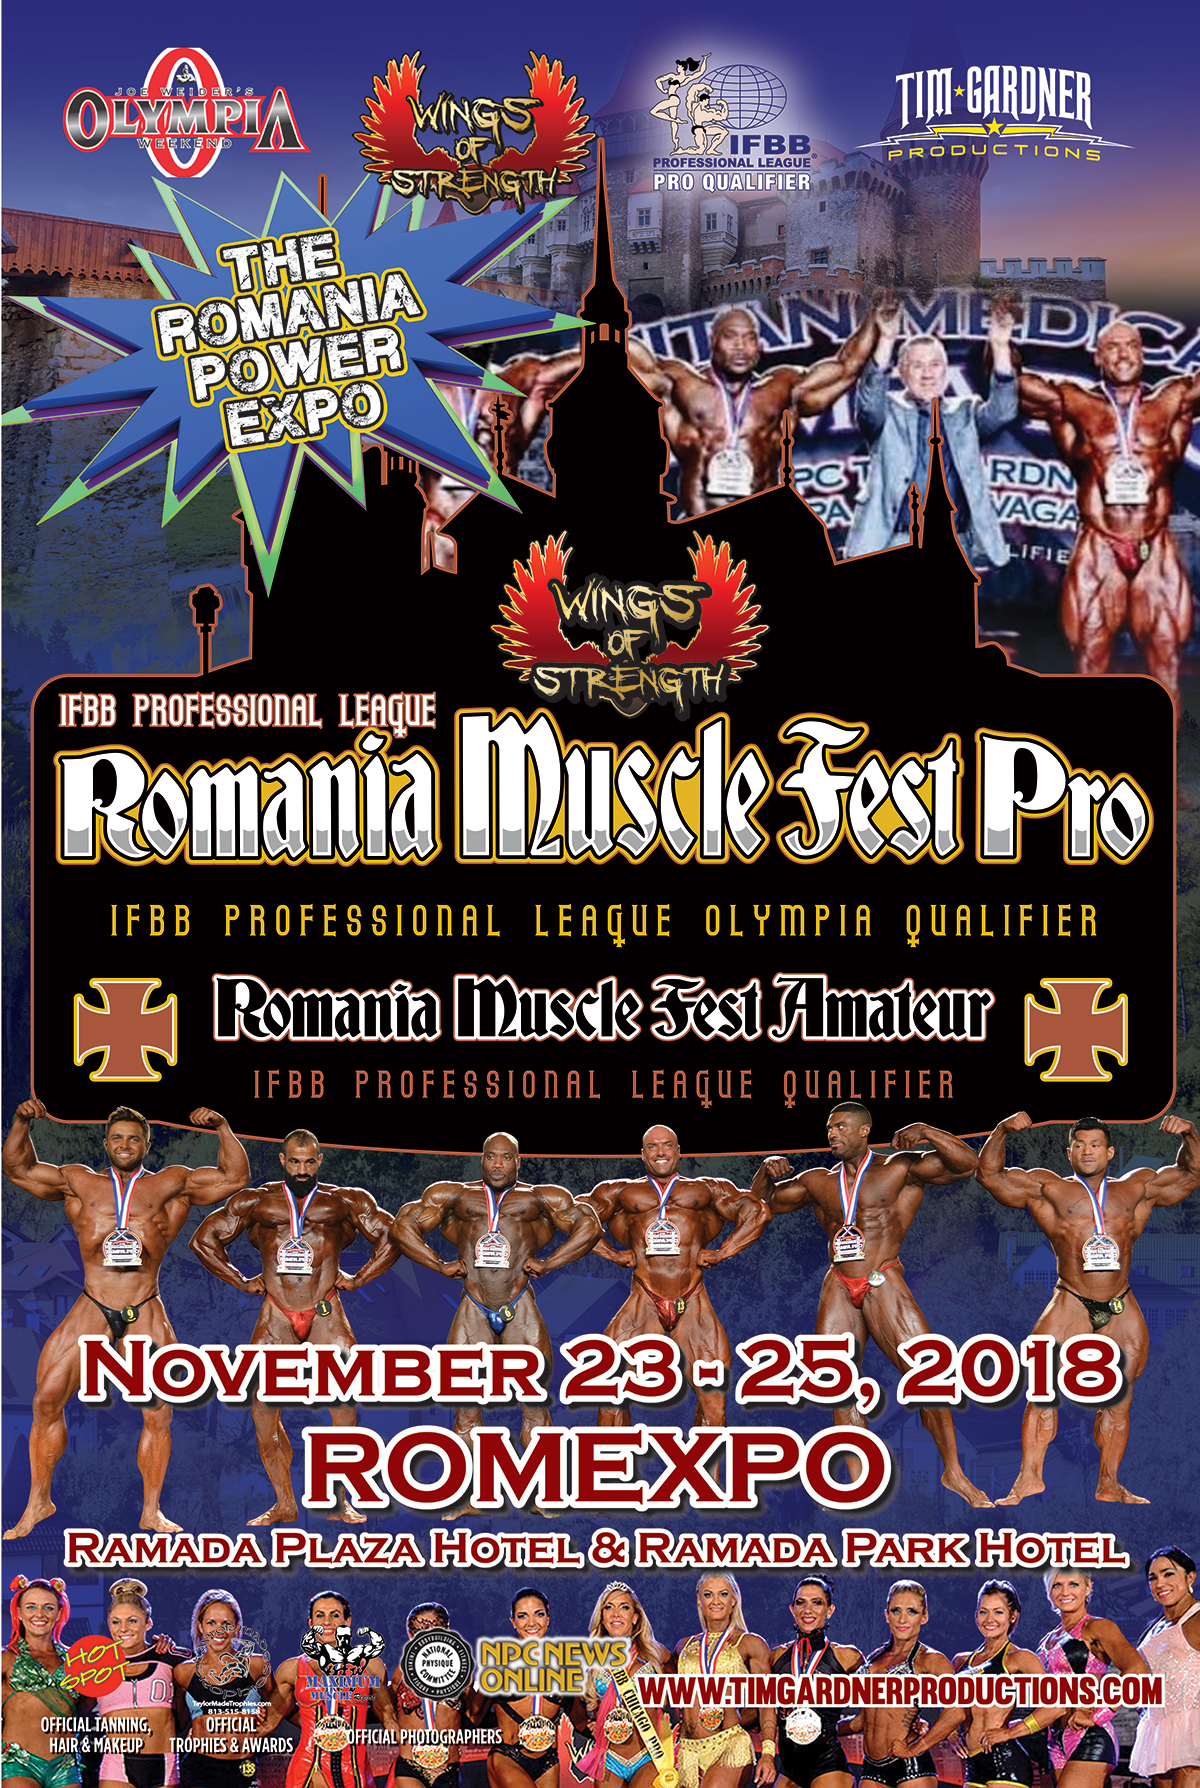 IFBB Professional League Wings of Strength Romania Muscle Fest Pro